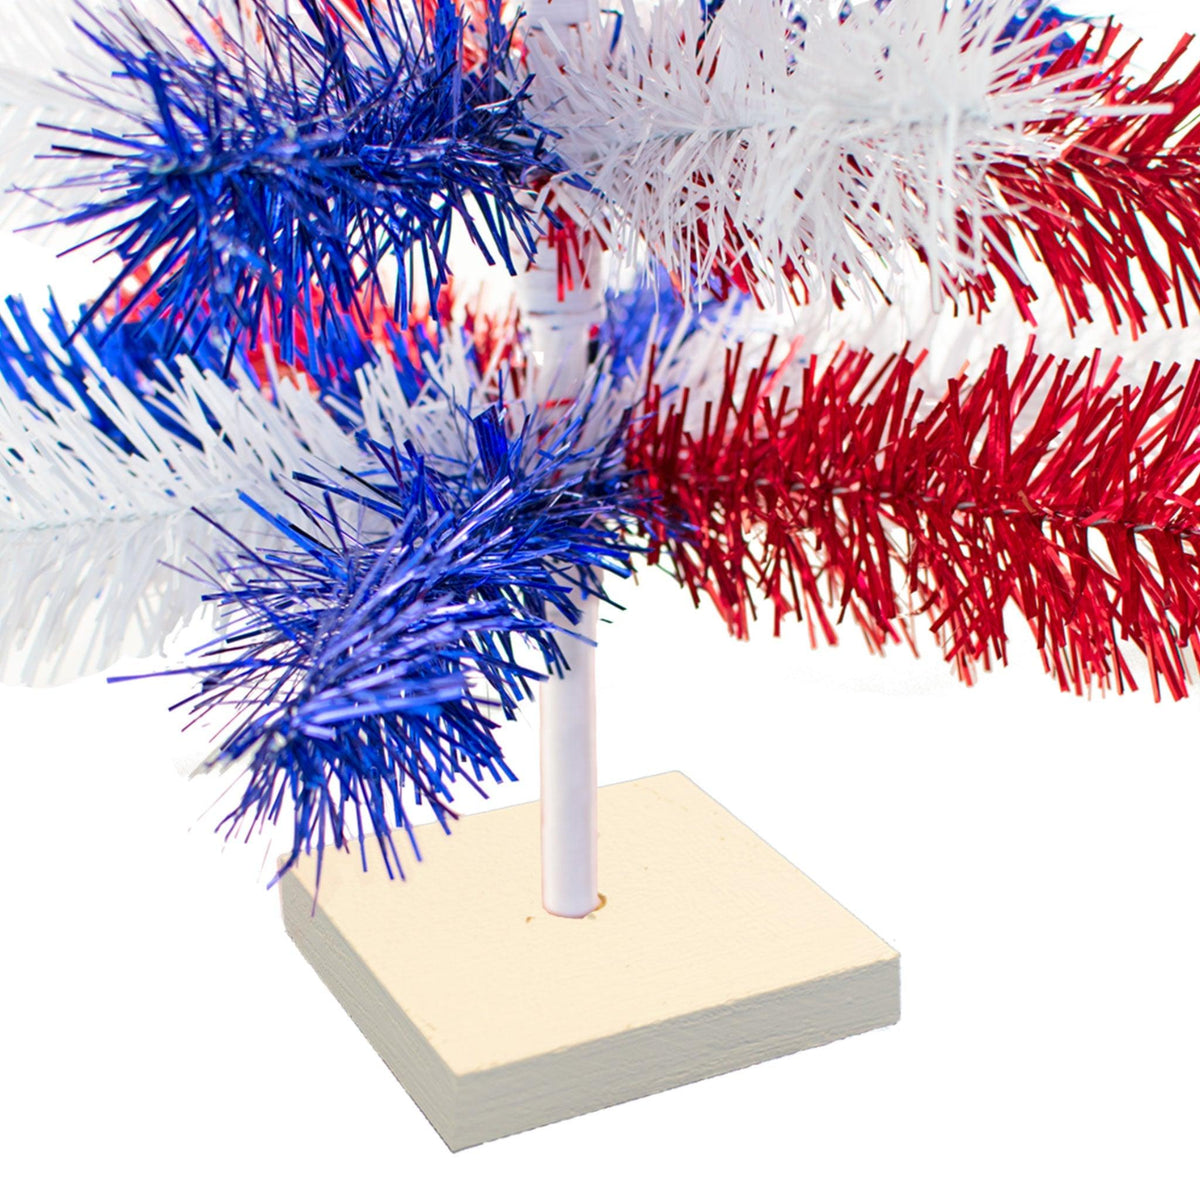 Bottom White Base with 18in Tall Red White and Blue Mixed Tinsel Christmas Tree on sale at leedisplay.com.